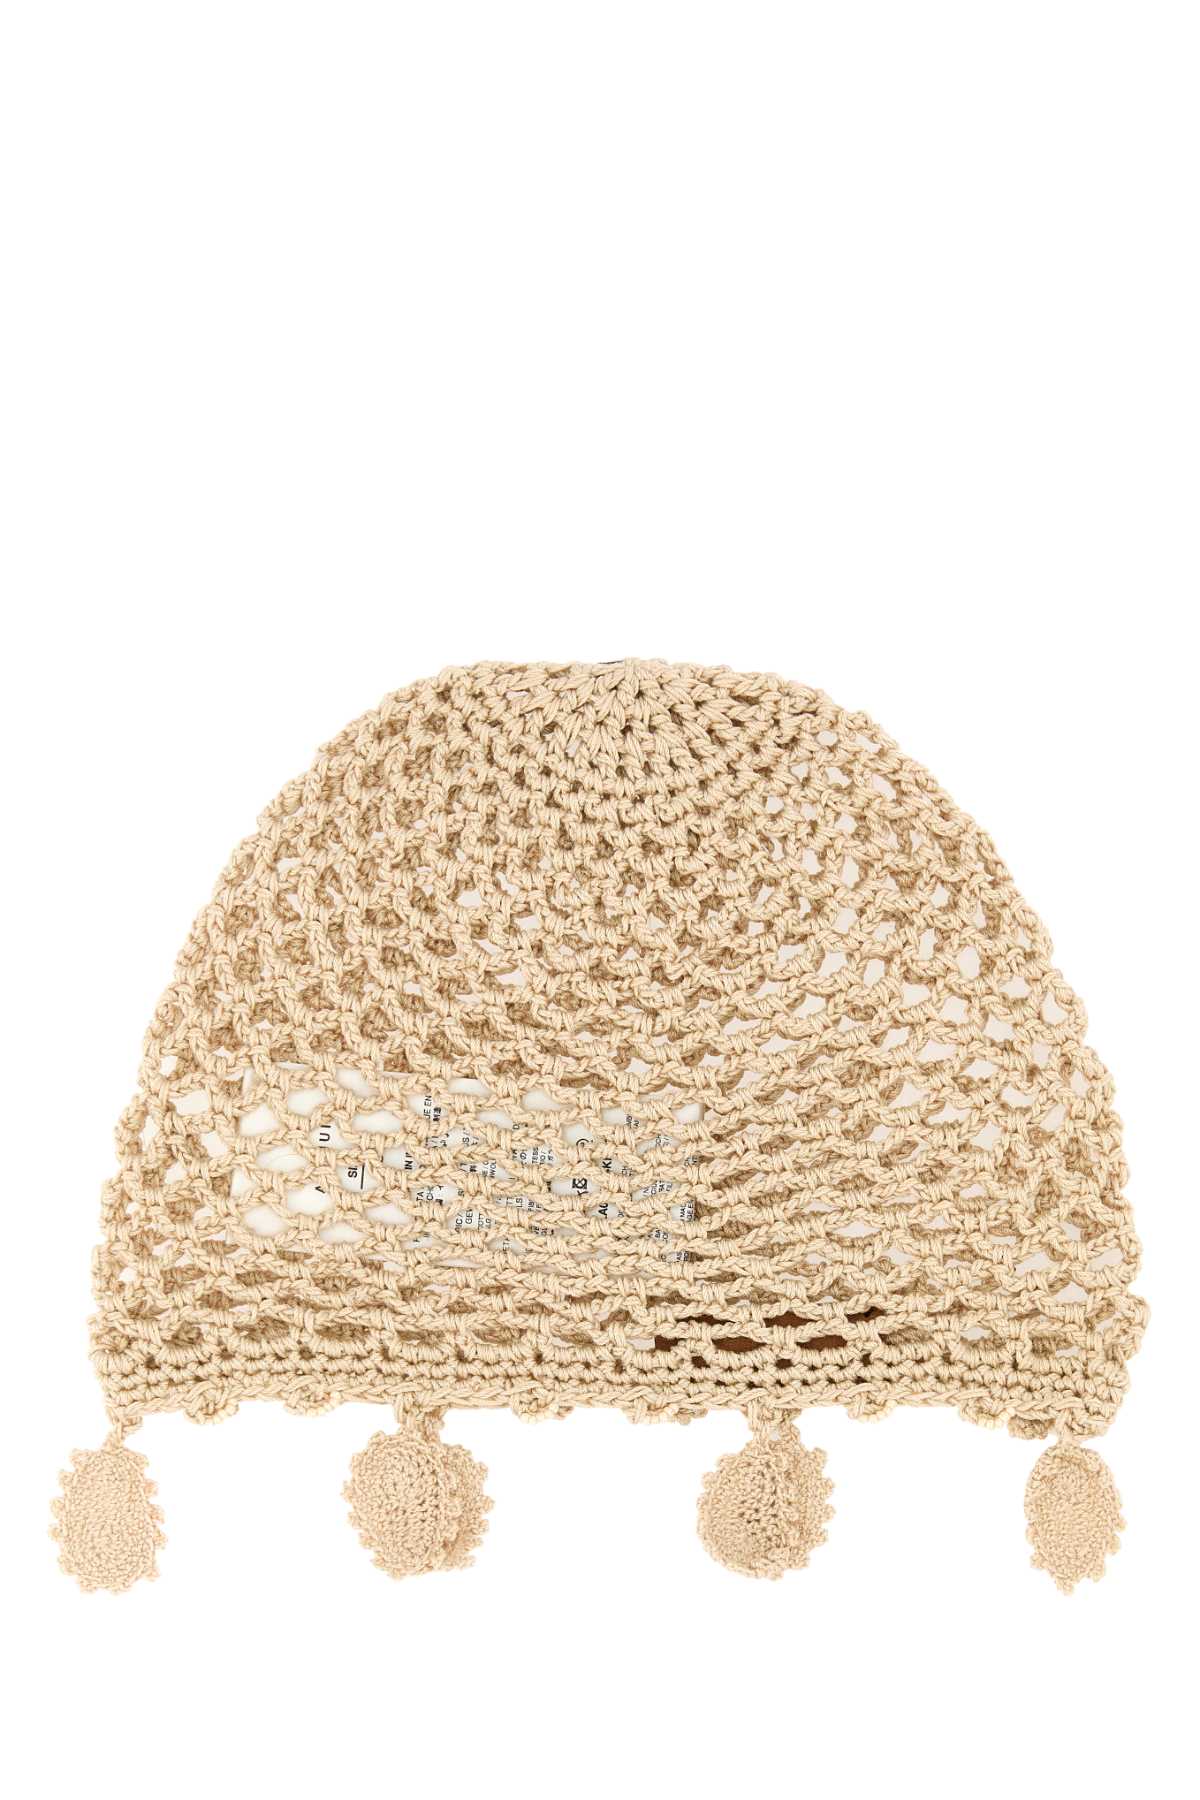 Sand Crochet Love Letter To India Hat